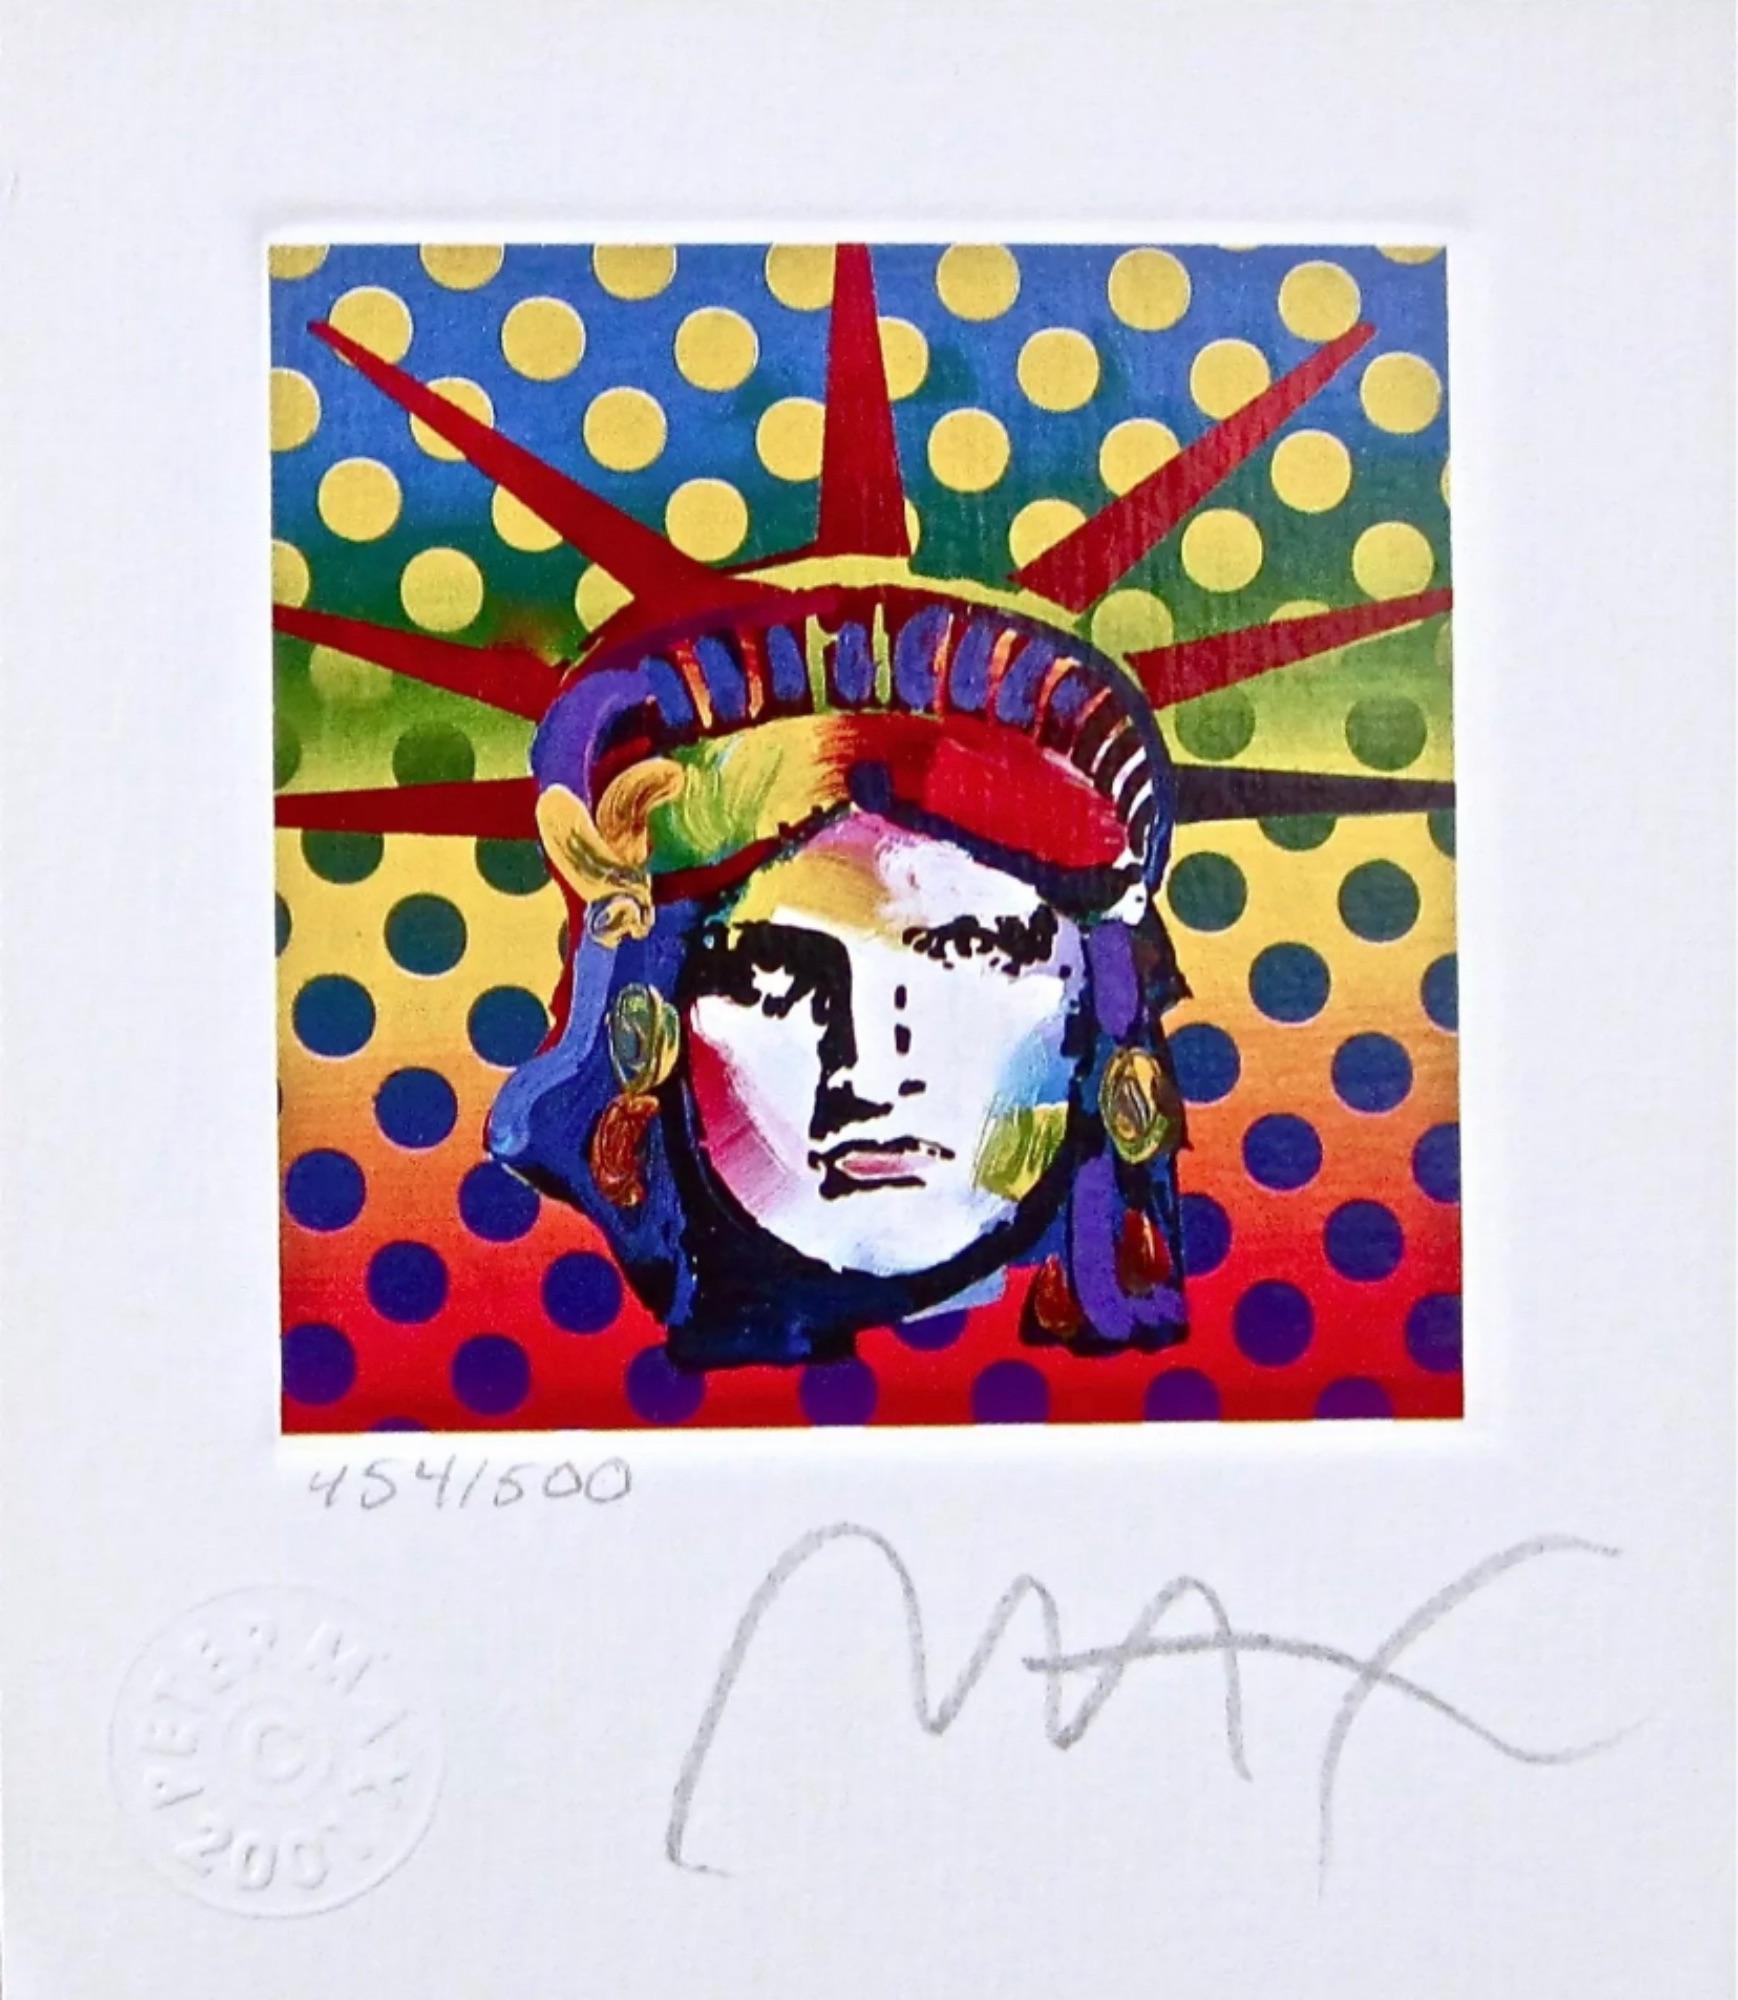 Tancredi limited edition signed print with black mount from an original drawing by Baz.